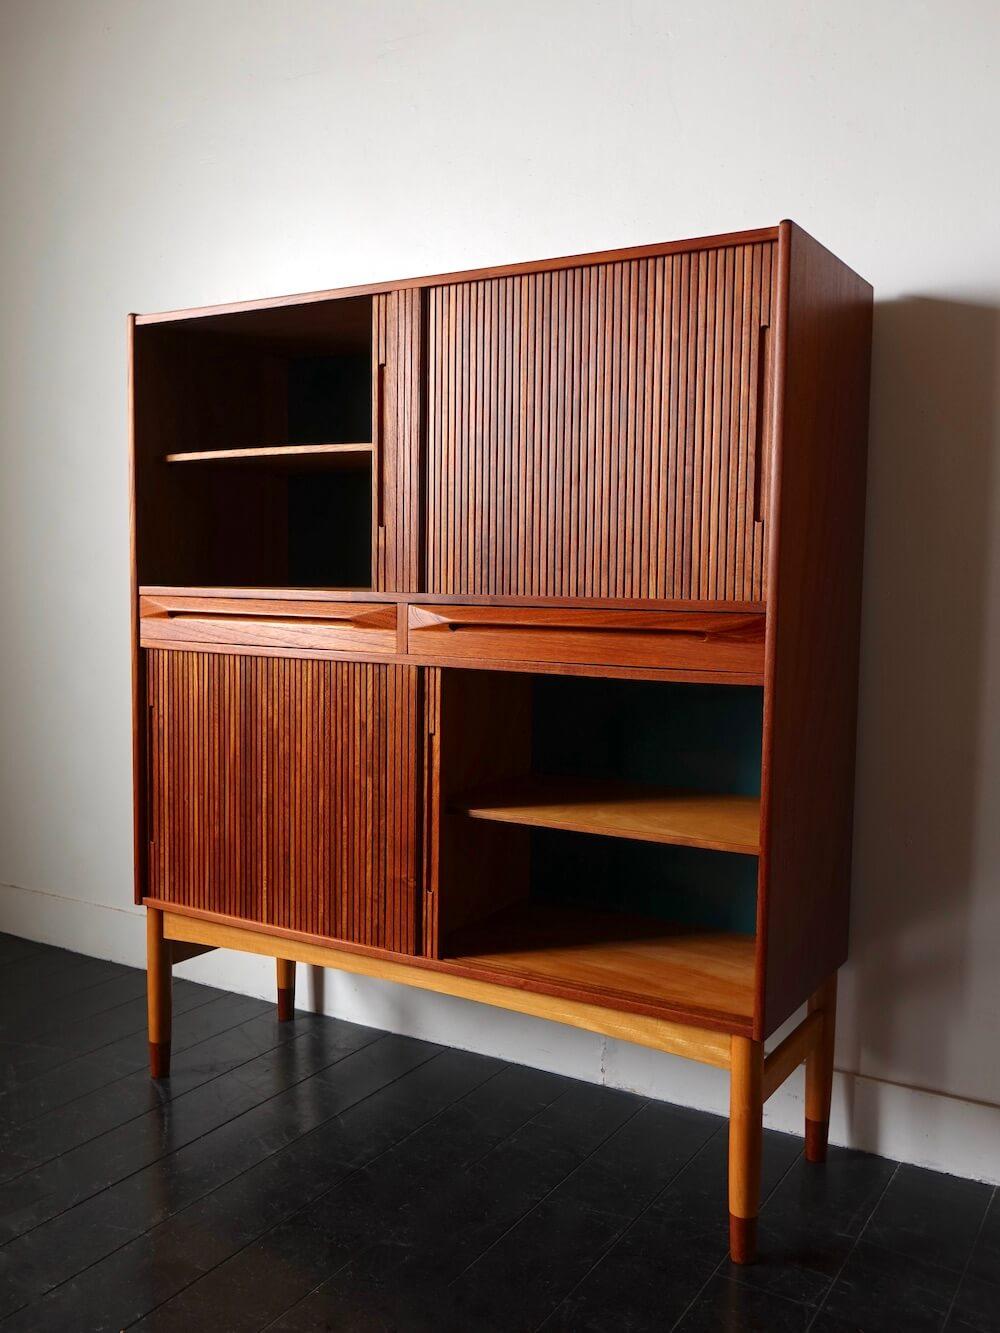 Cabinet with tamboured doors by Ib Kofod Larsen for Fredericia